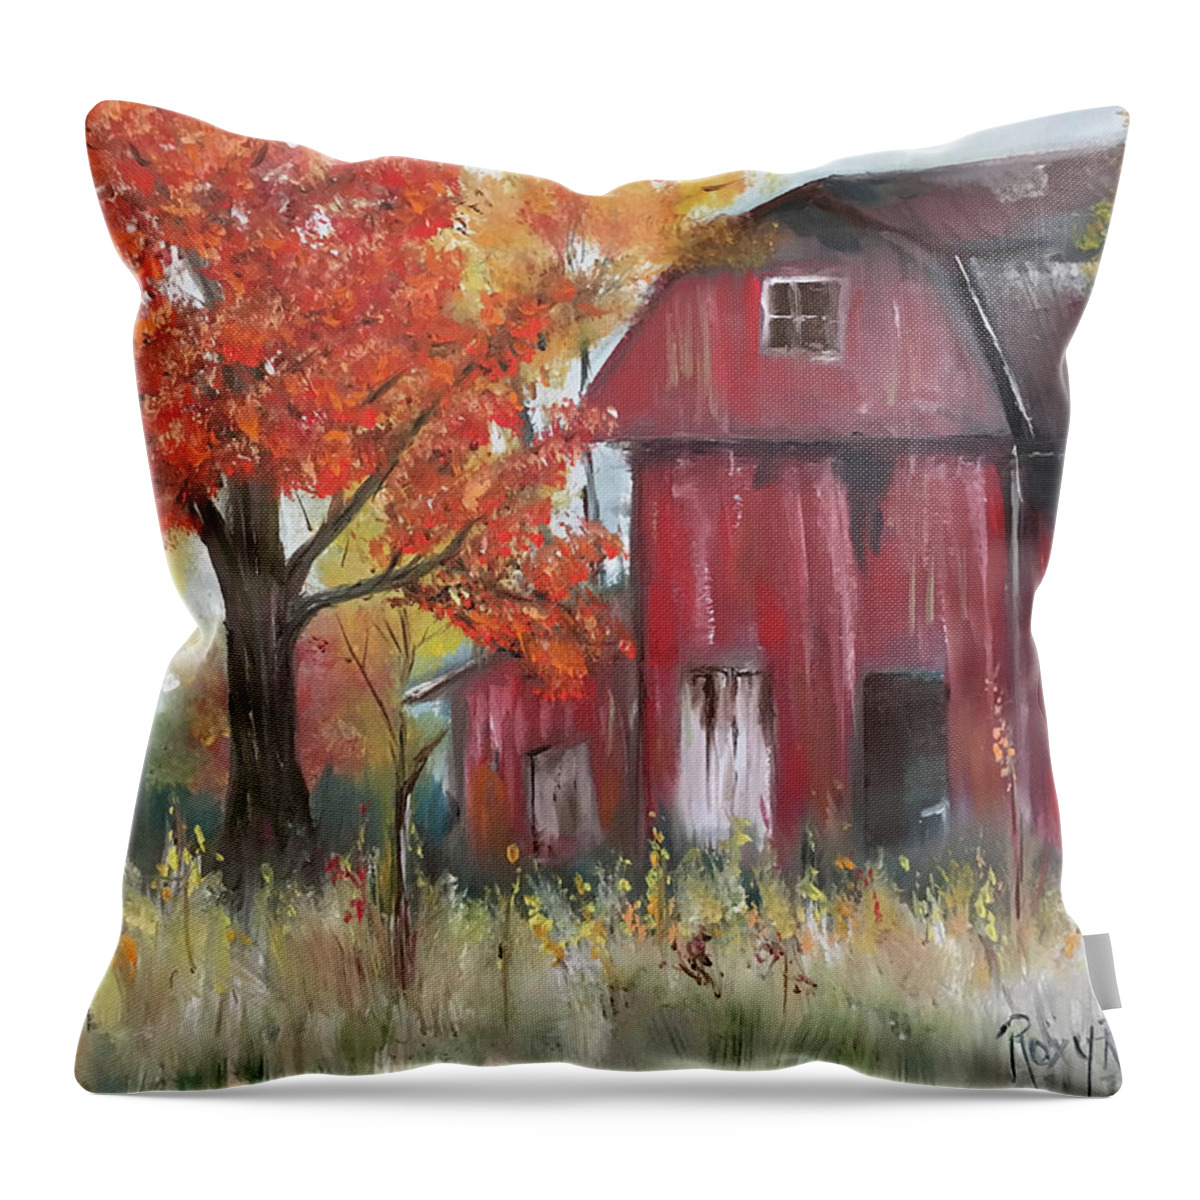 Barn Throw Pillow featuring the photograph The Abandoned Barn by Roxy Rich